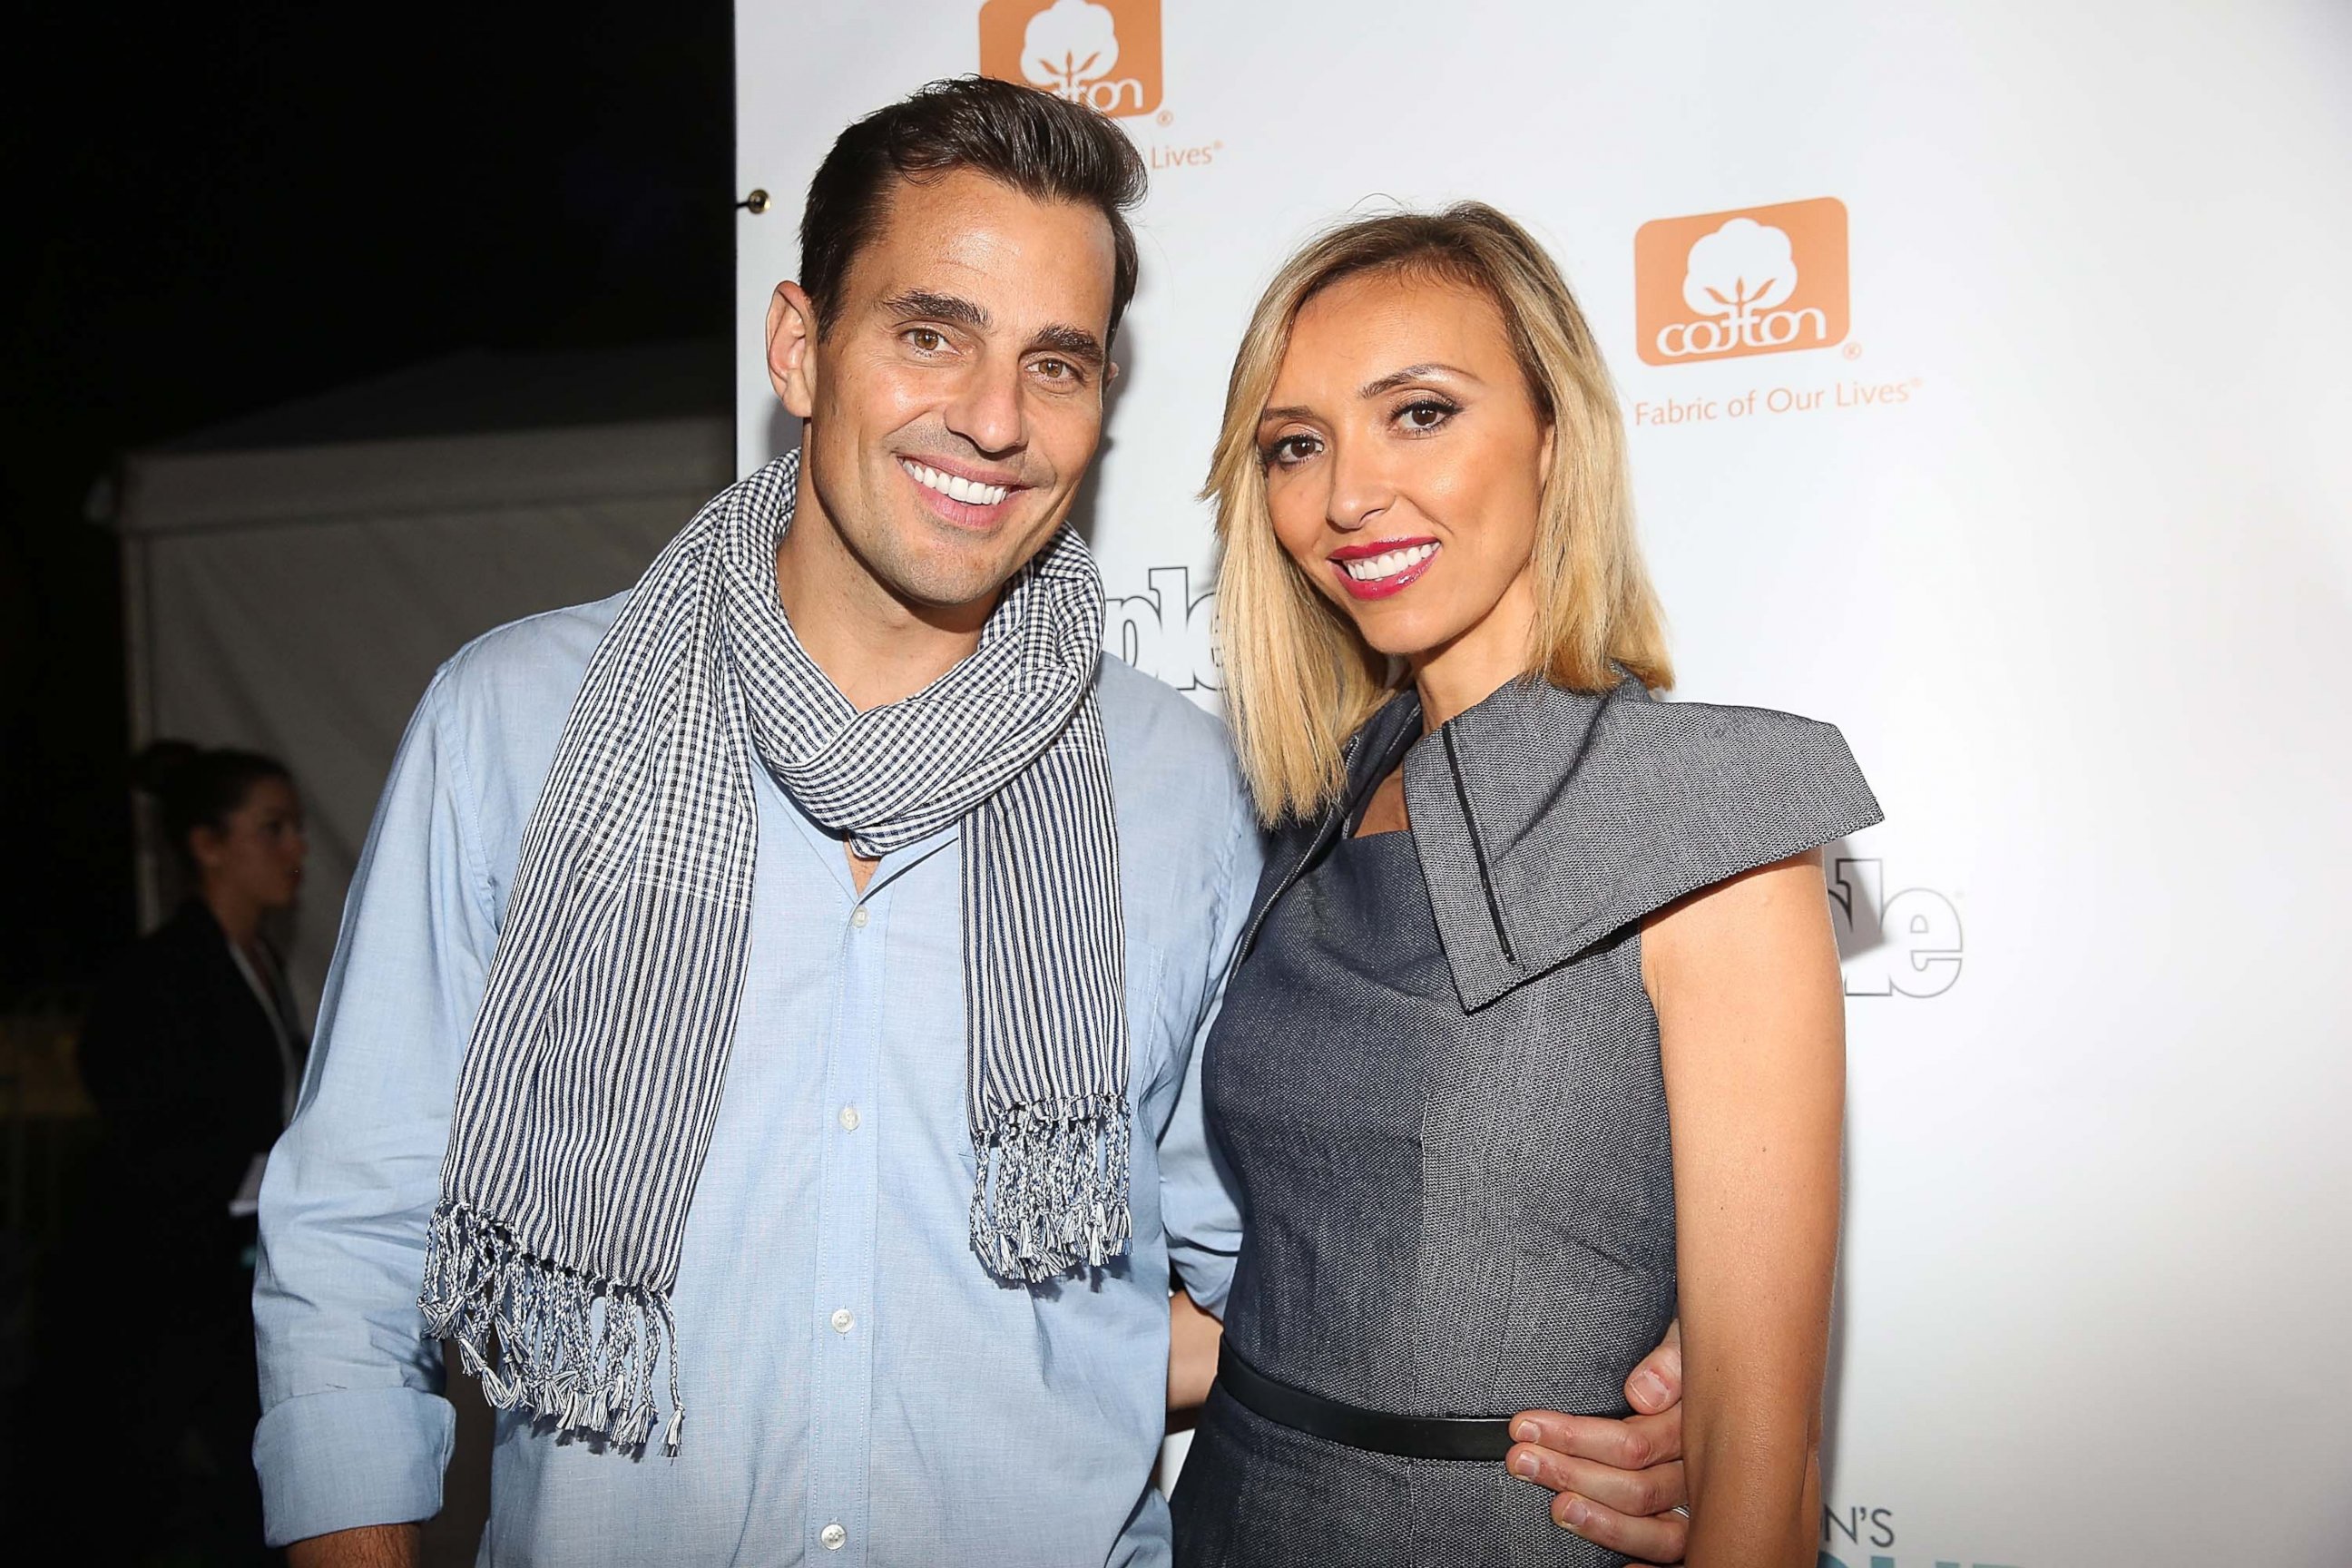 PHOTO: Bill Rancic and Giuliana Rancic attends Cotton's 24 Hour Runway Show on Nov. 7, 2014 in Miami.